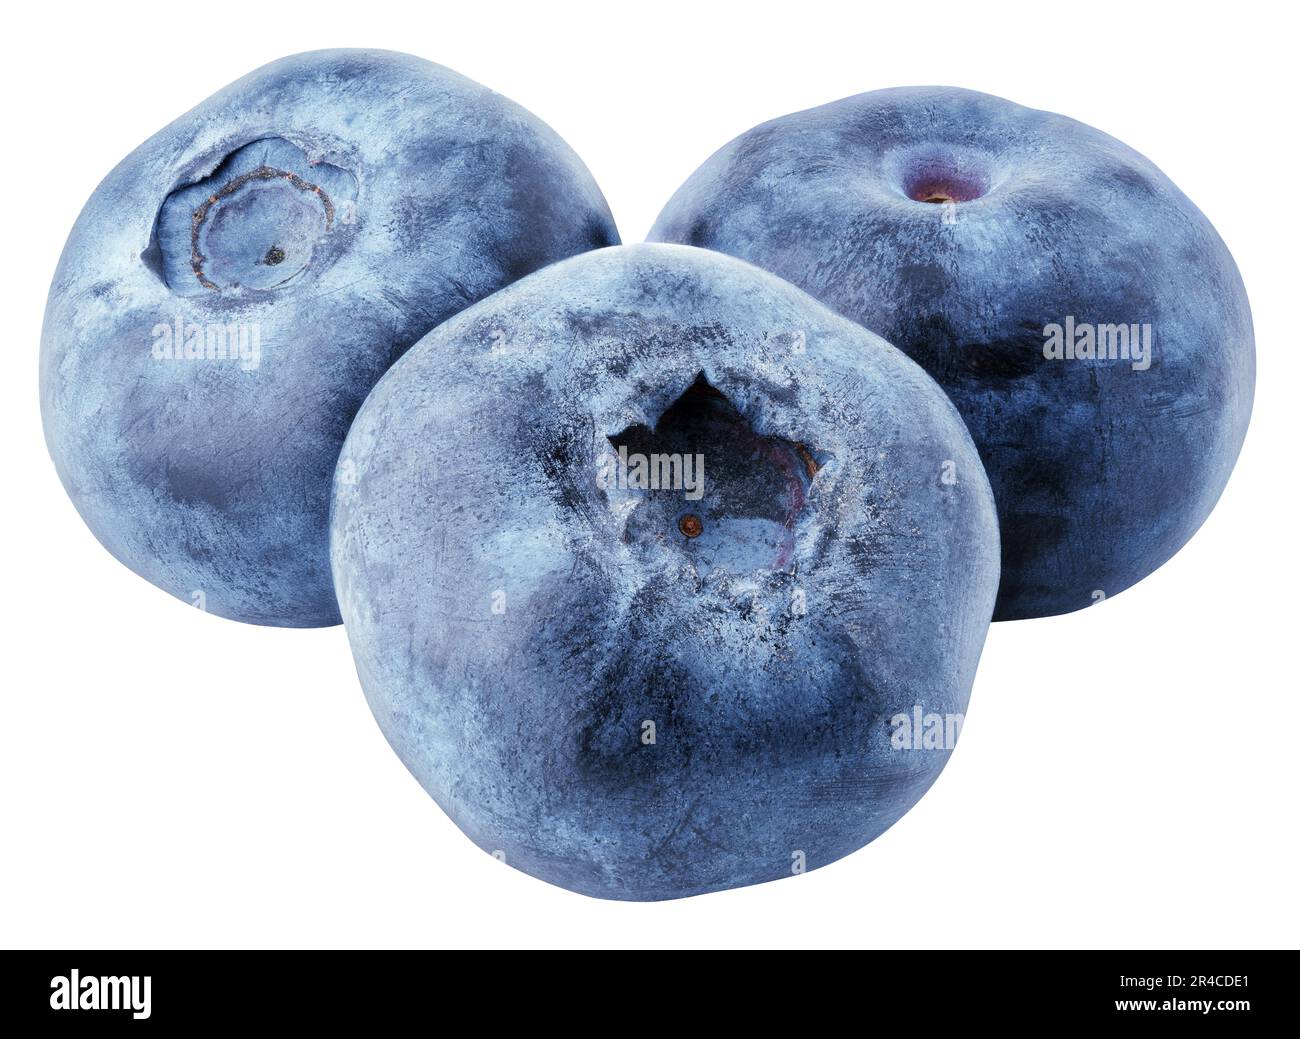 Group of blueberry berry isolated on white background with clipping path. Stock Photo